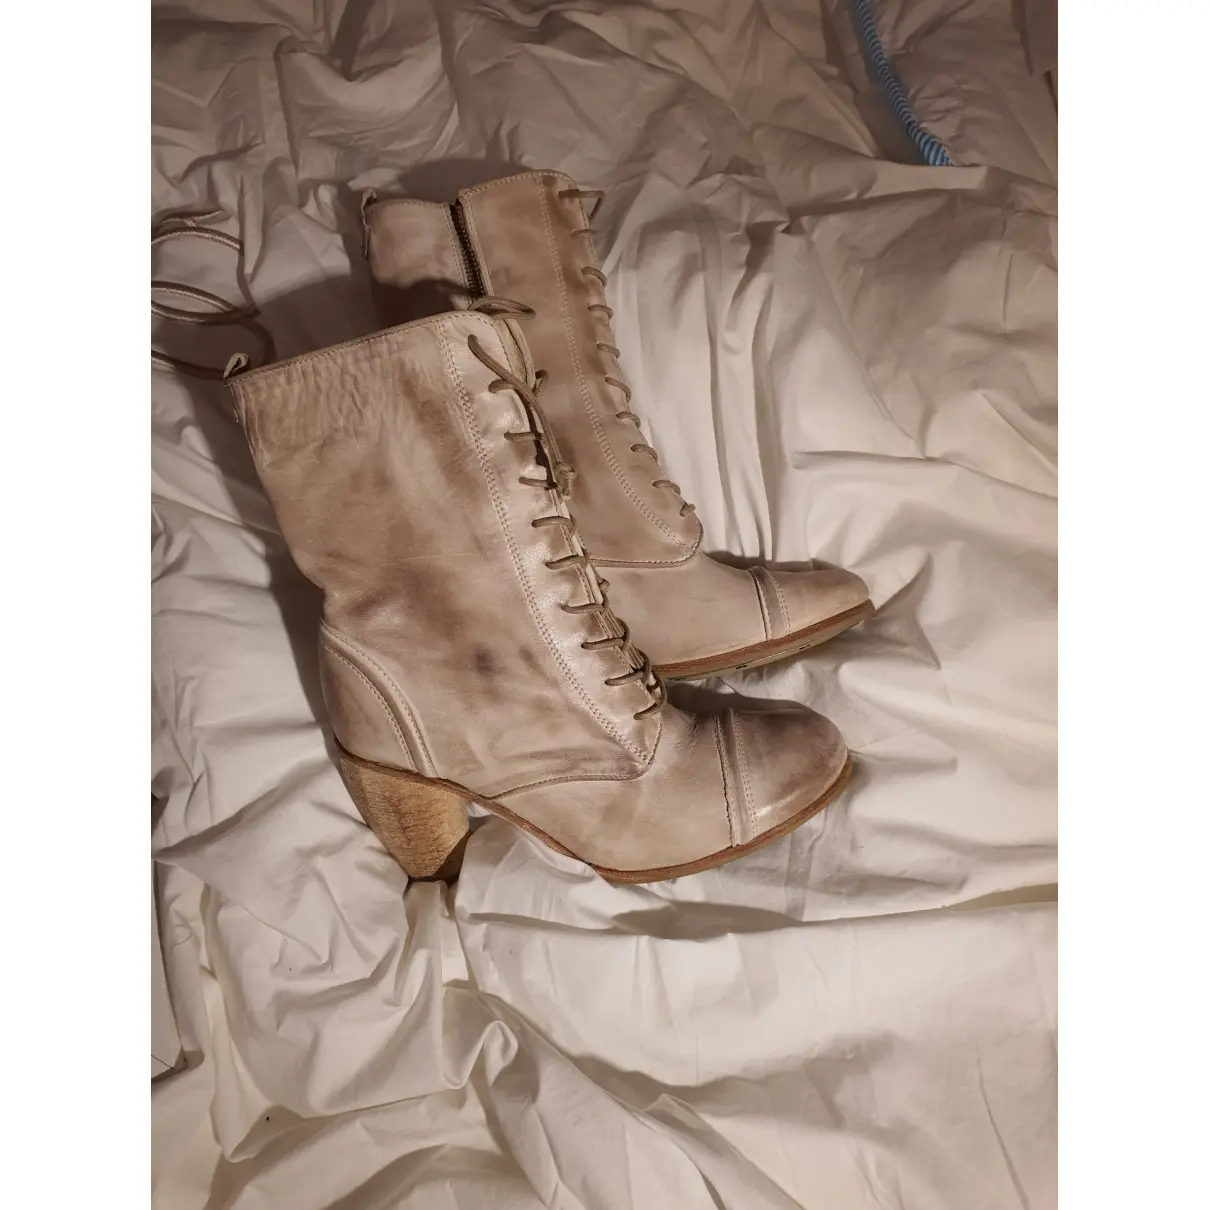 Buy All Saints Leather lace up boots online